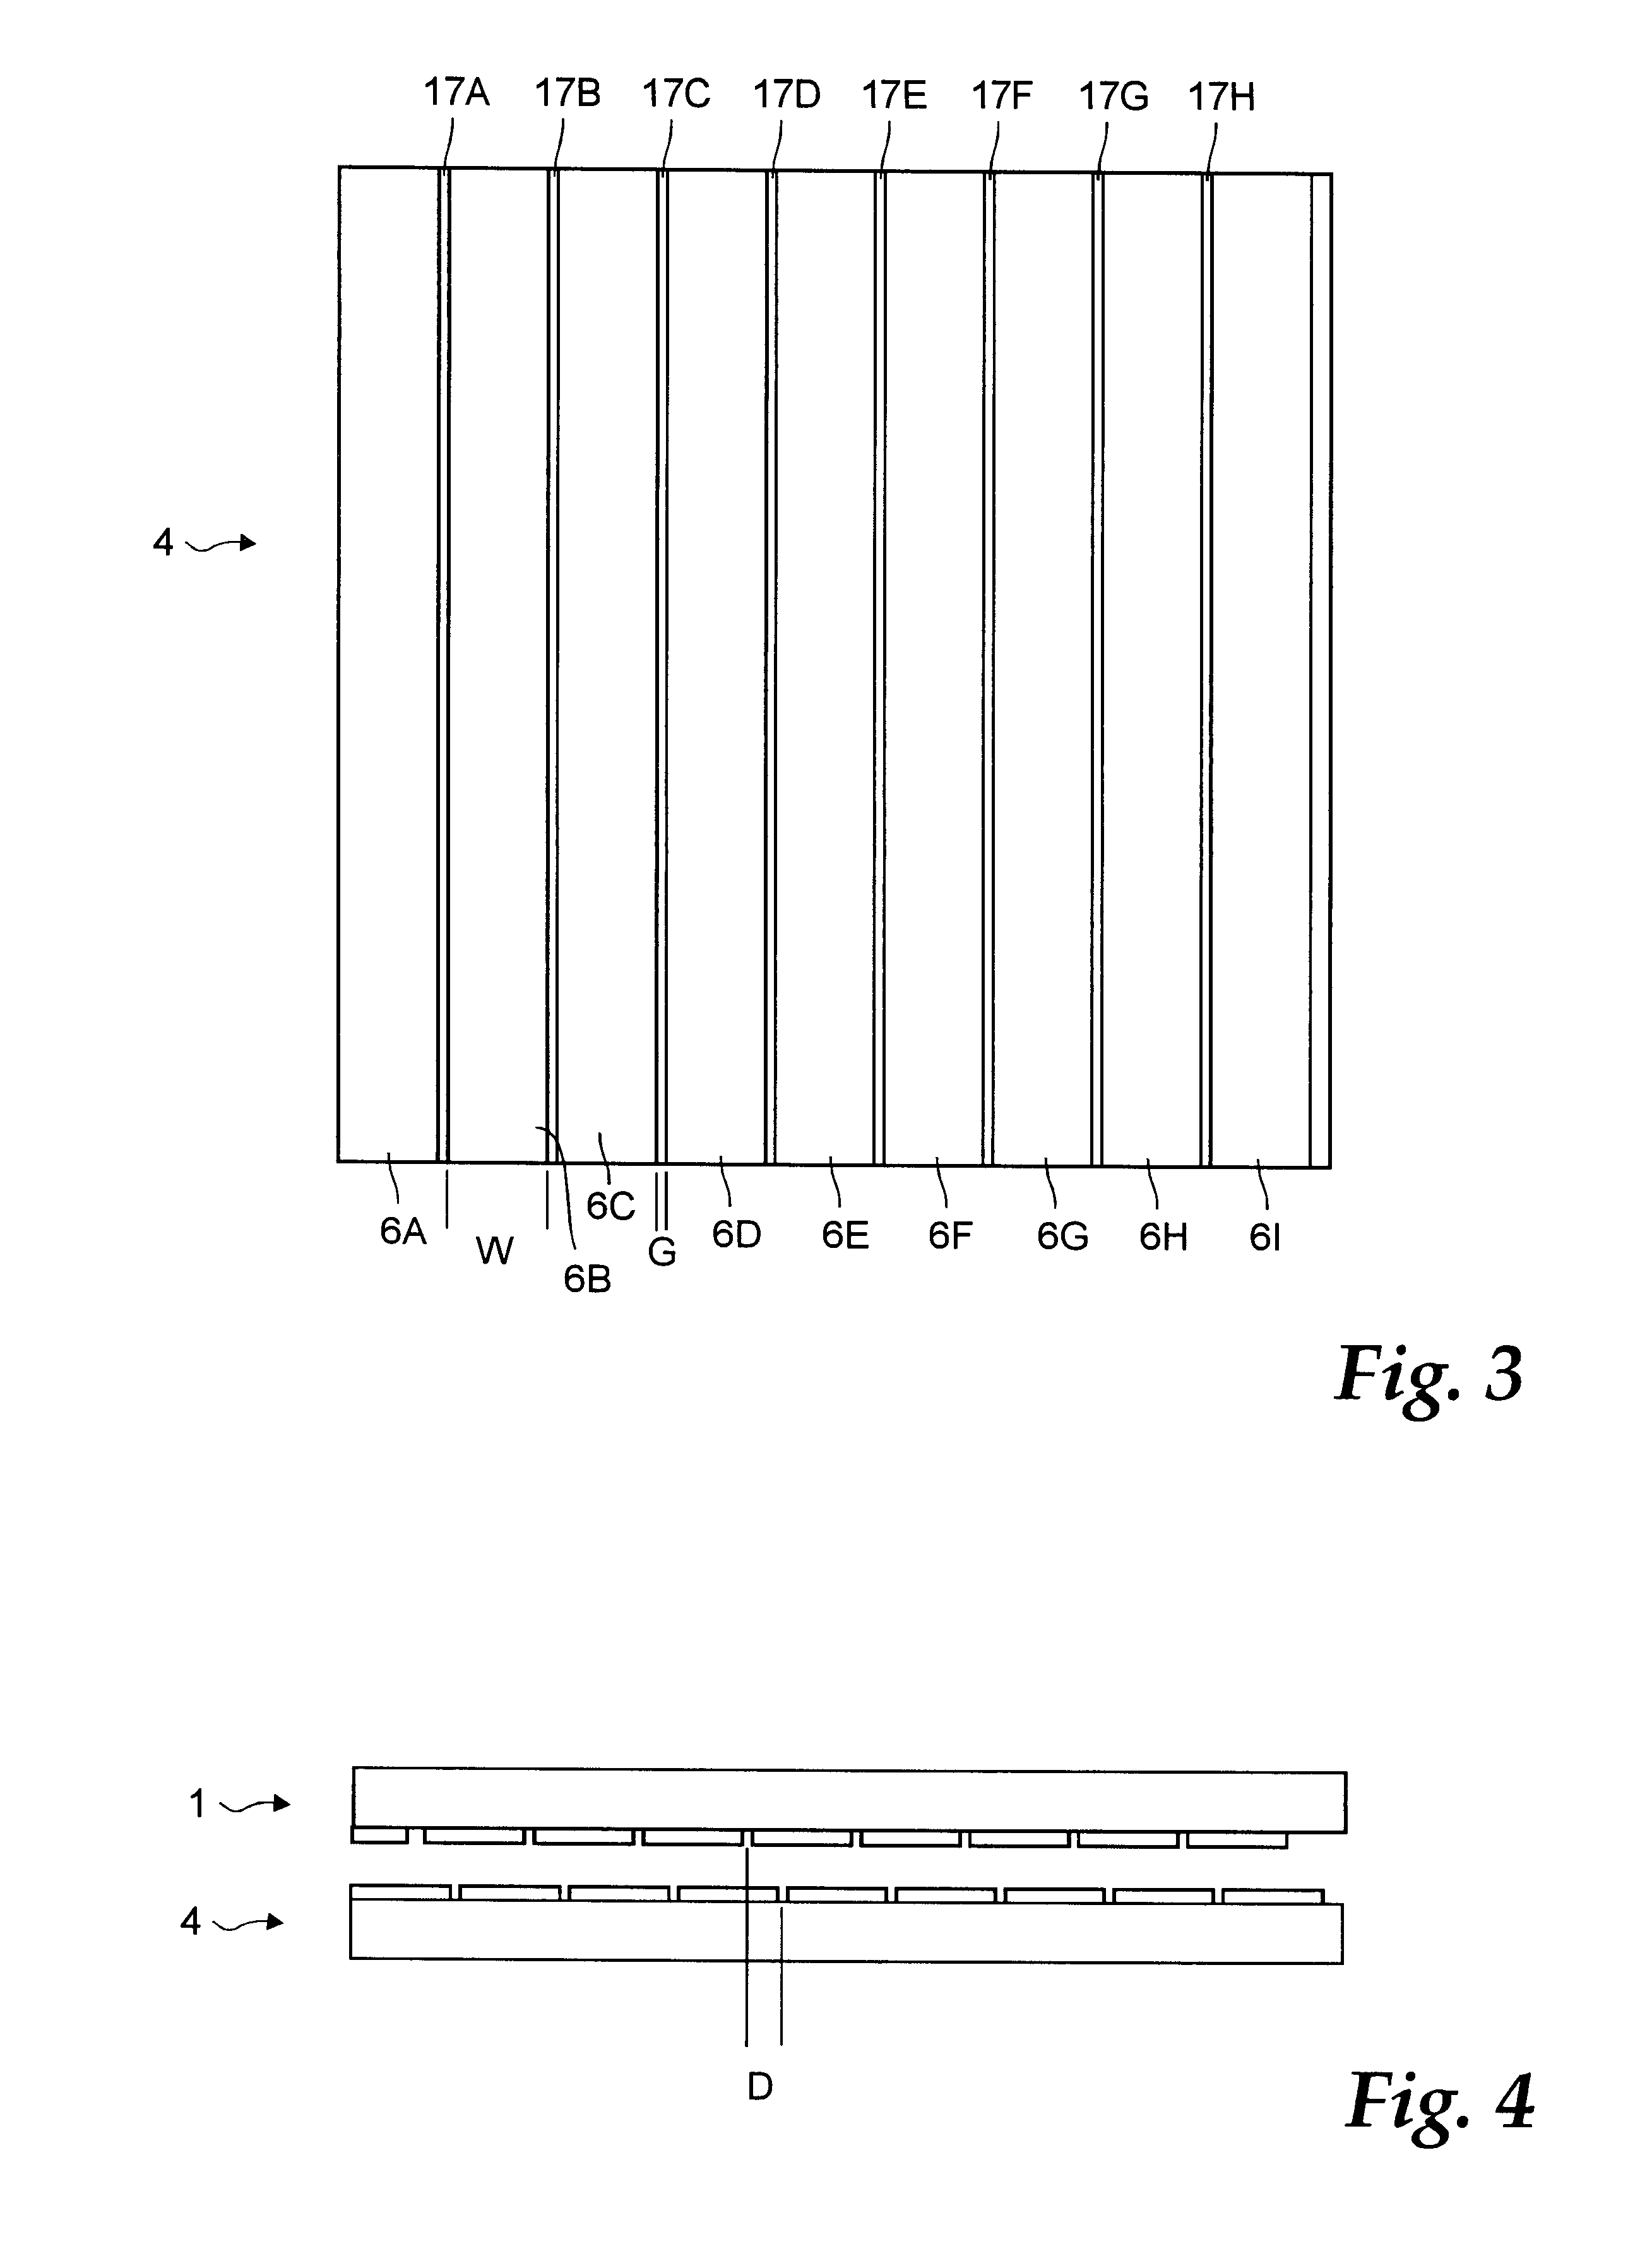 Electric connection of electrochemical and photoelectrochemical cells